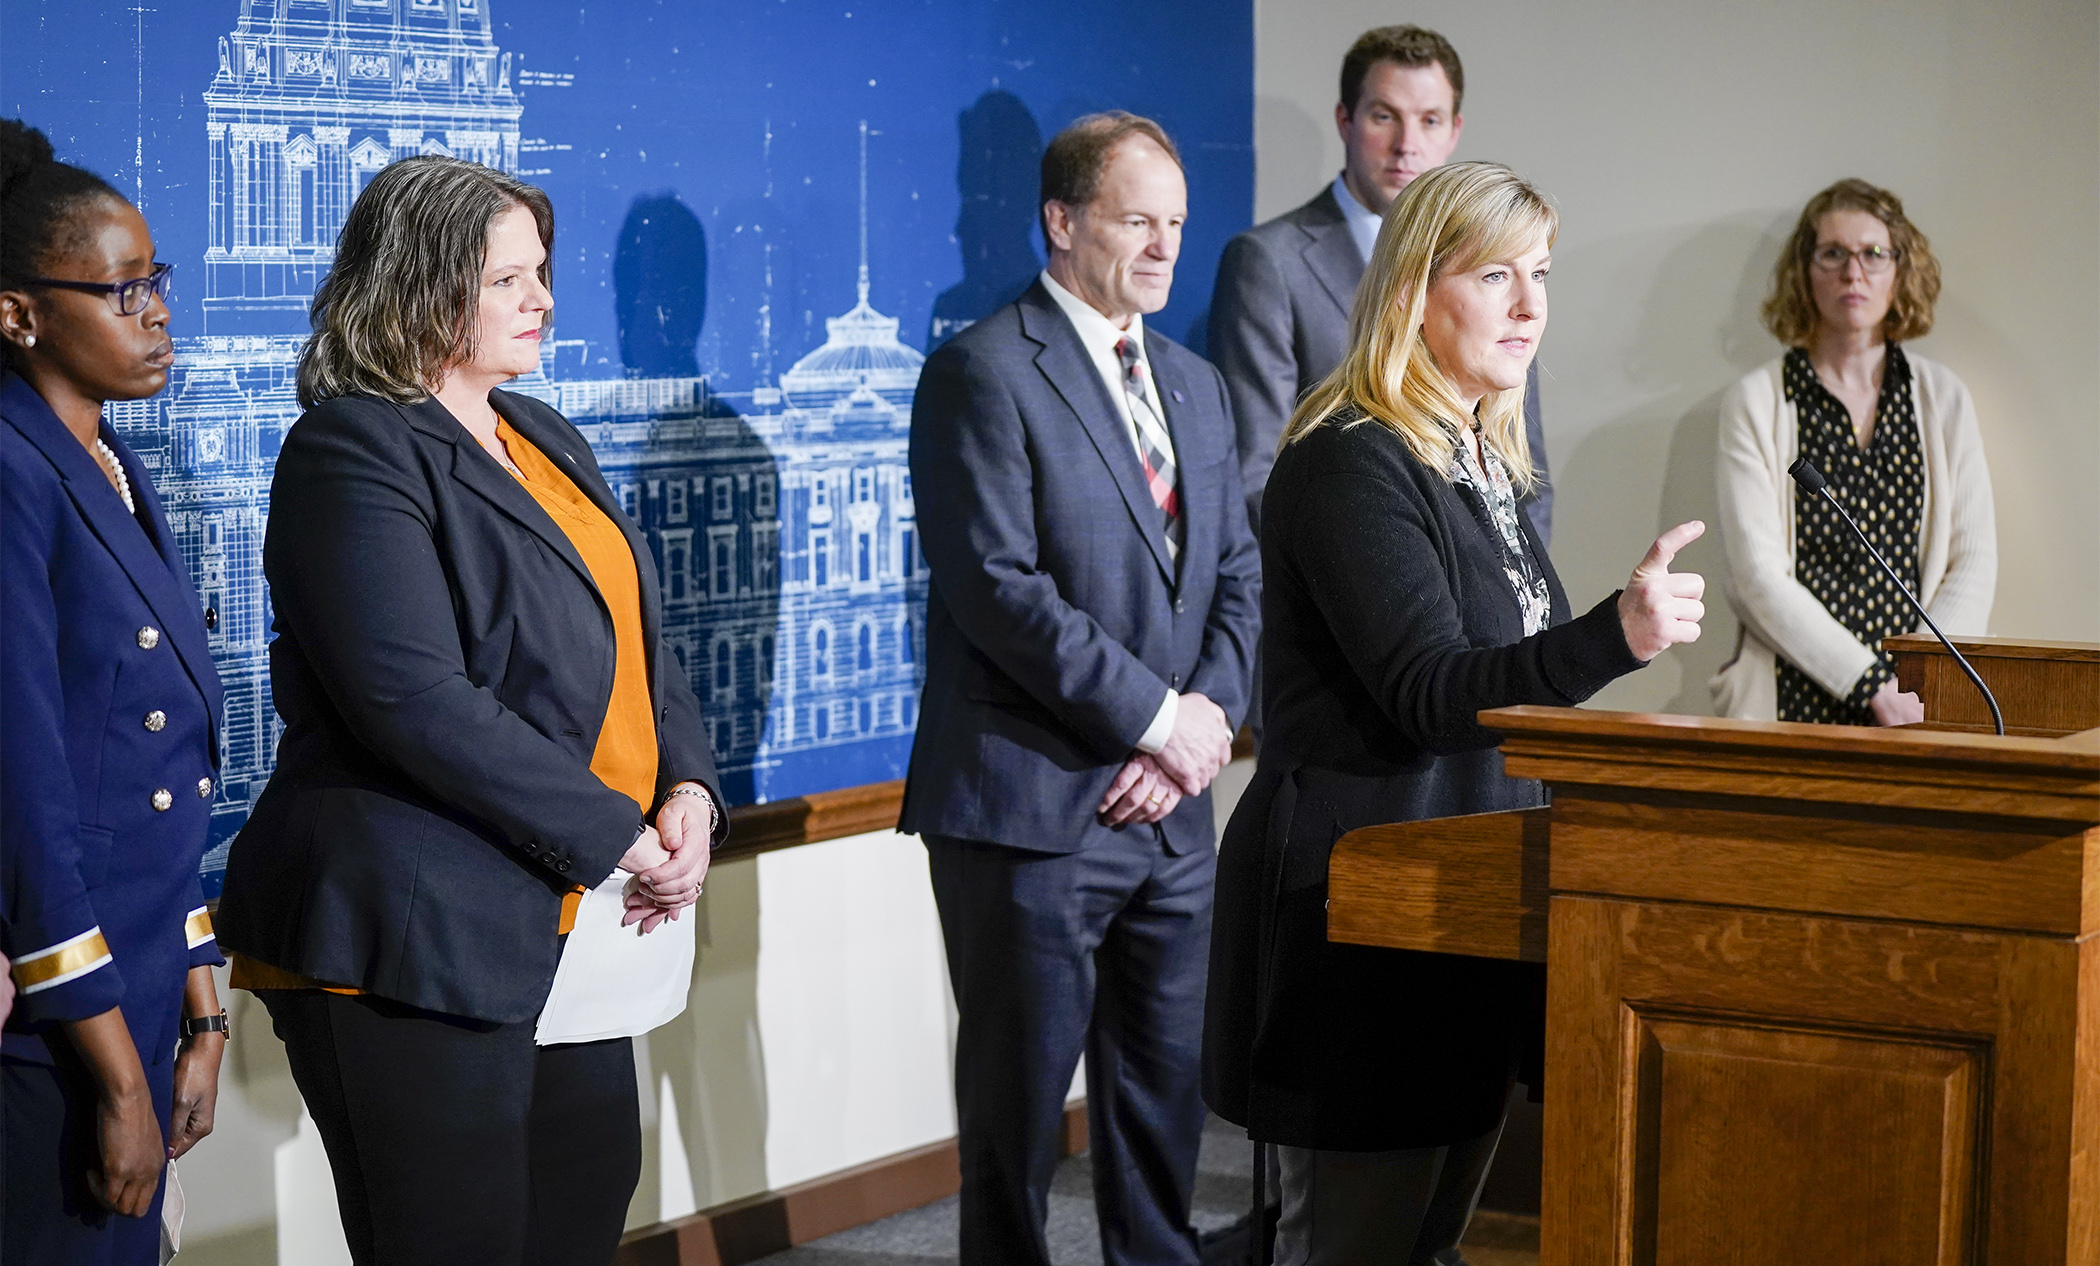 House Speaker Melissa Hortman fields a question during an April 5 news conference where House DFL leaders announced a plan to reduce the costs of child care, housing and prescription drugs for Minnesotans. (Photo by Paul Battaglia)